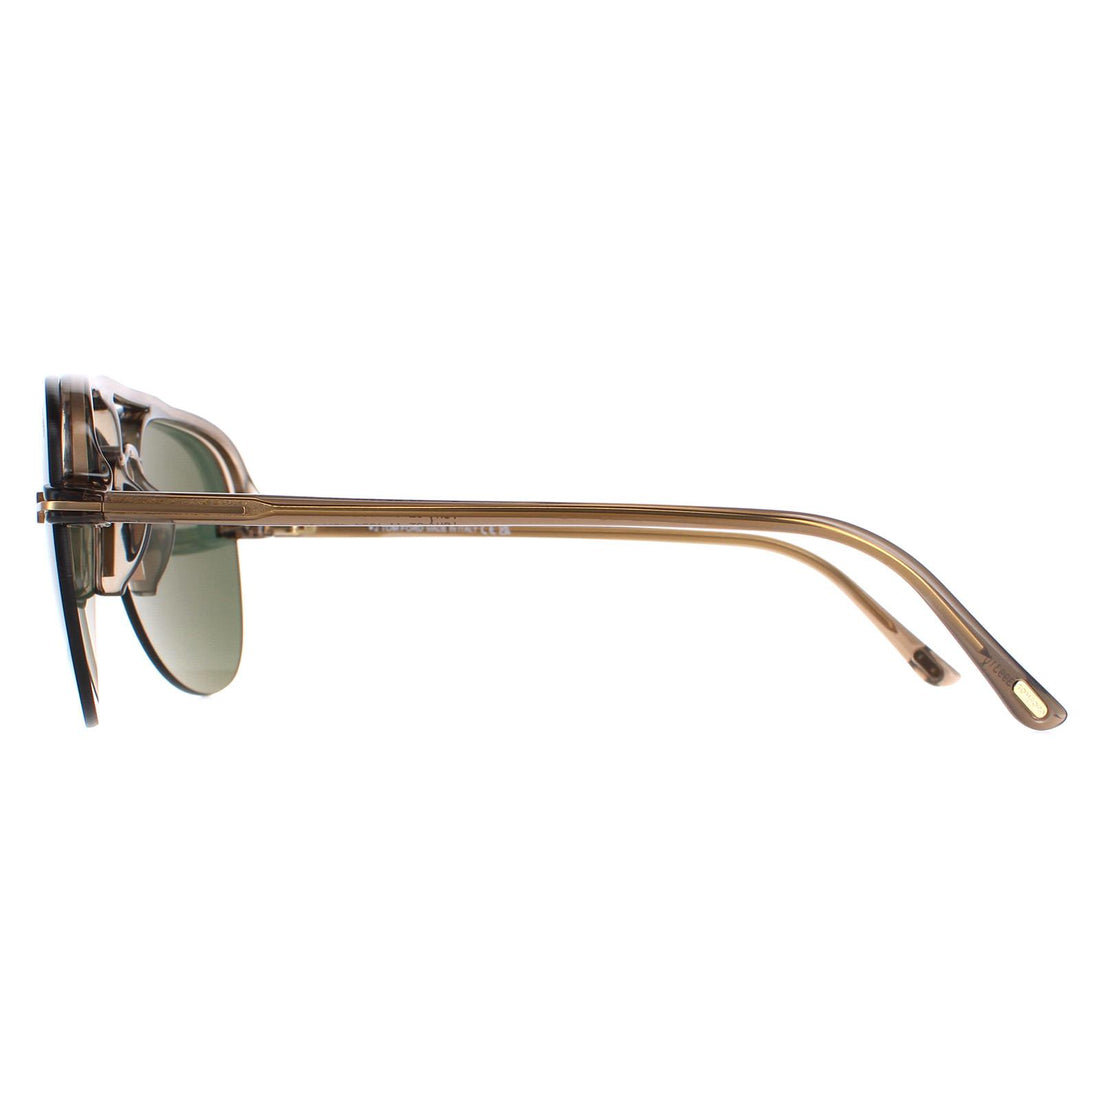 Tom Ford Sunglasses Terry 02 FT1004 45N Shiny Light Brown Green